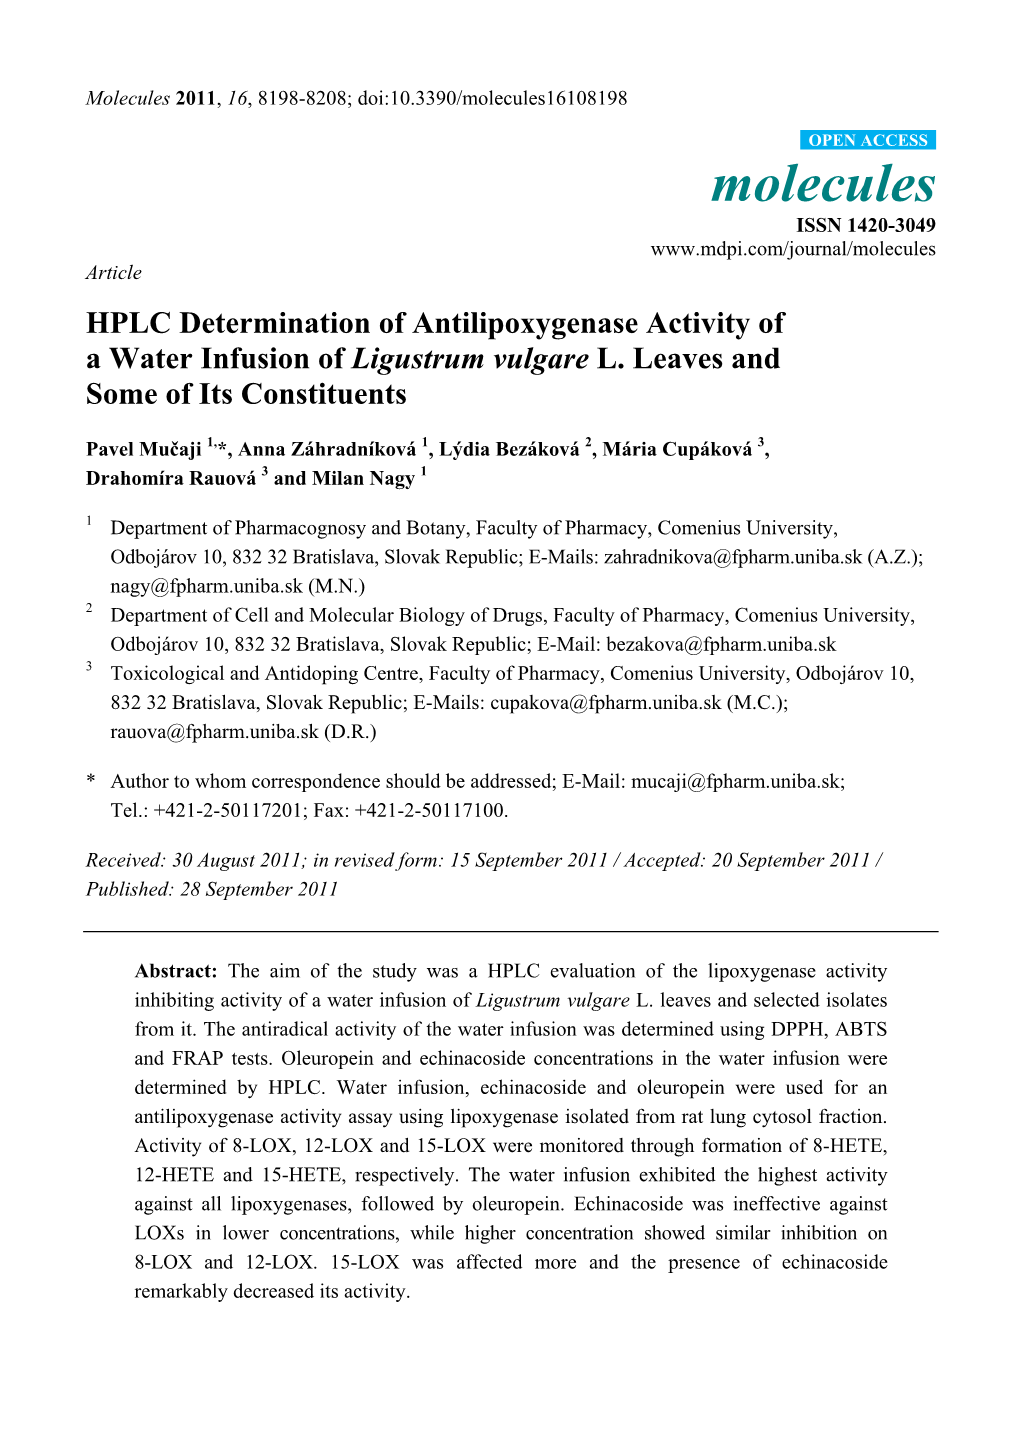 HPLC Determination of Antilipoxygenase Activity of a Water Infusion of Ligustrum Vulgare L